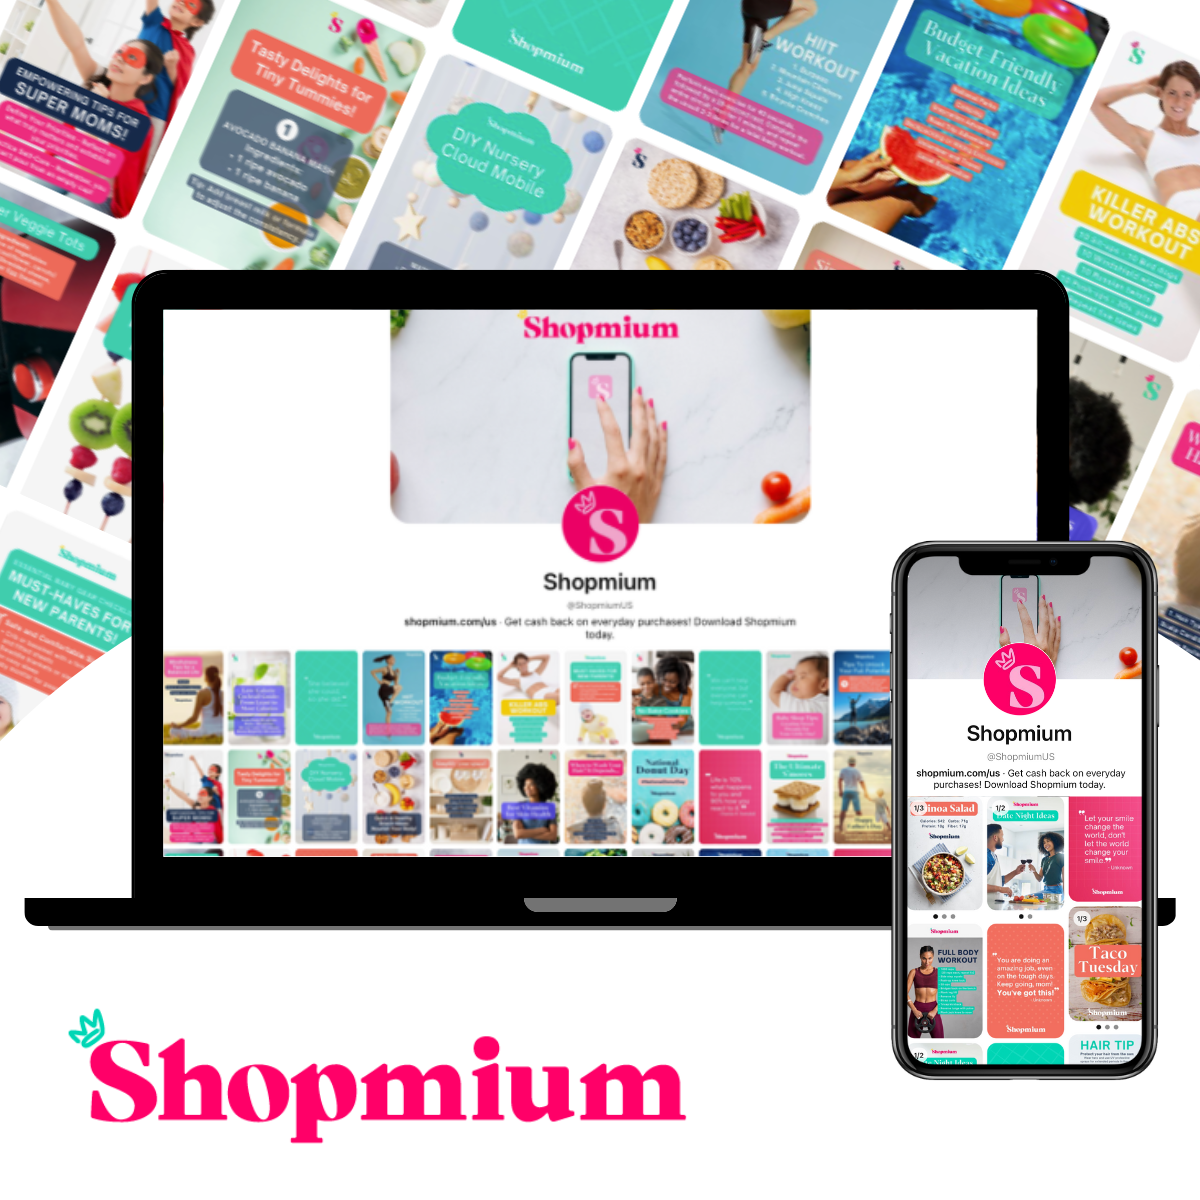 Elevating Customer Engagement: Gratton Westman’s Collaboration with Shopmium to Enhance Pinterest Content